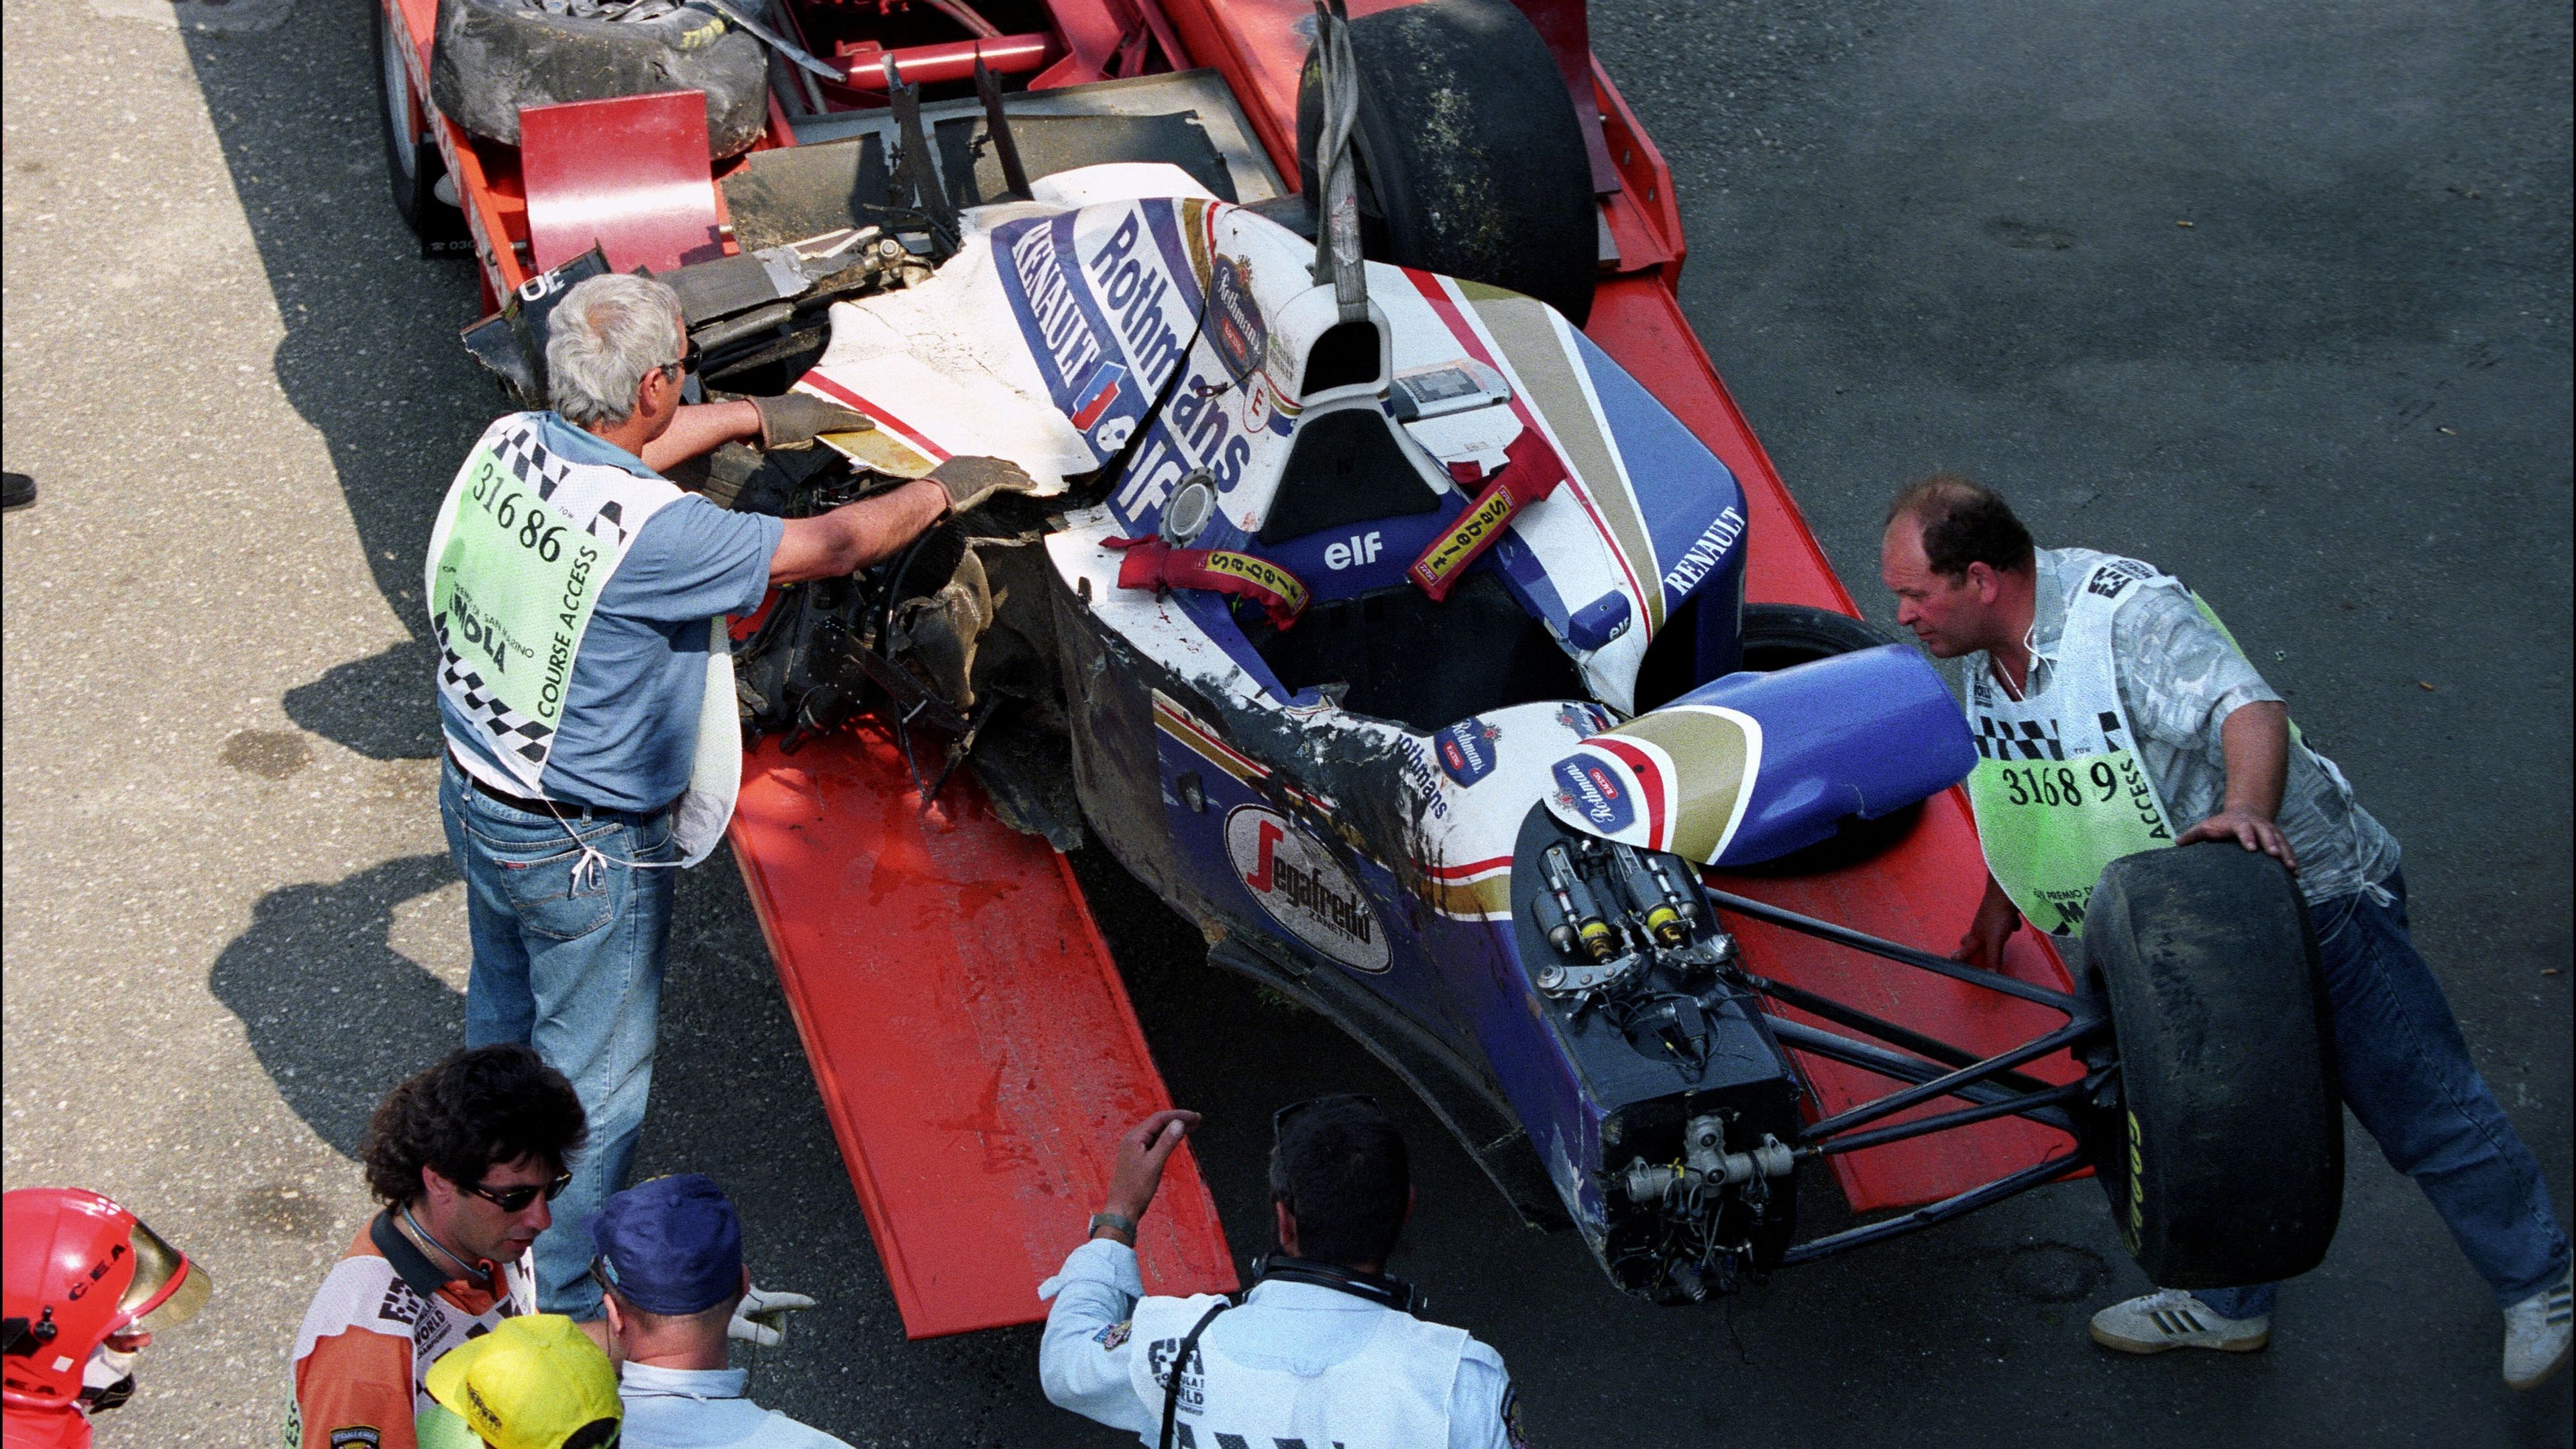 The destroyed car of Ayrton Senna after his crash during the 1994 San Marino Grand Prix in Imola, Italy on May 01, 1994. (Photo by Jean-Marc LOUBAT/Gamma-Rapho via Getty Images)